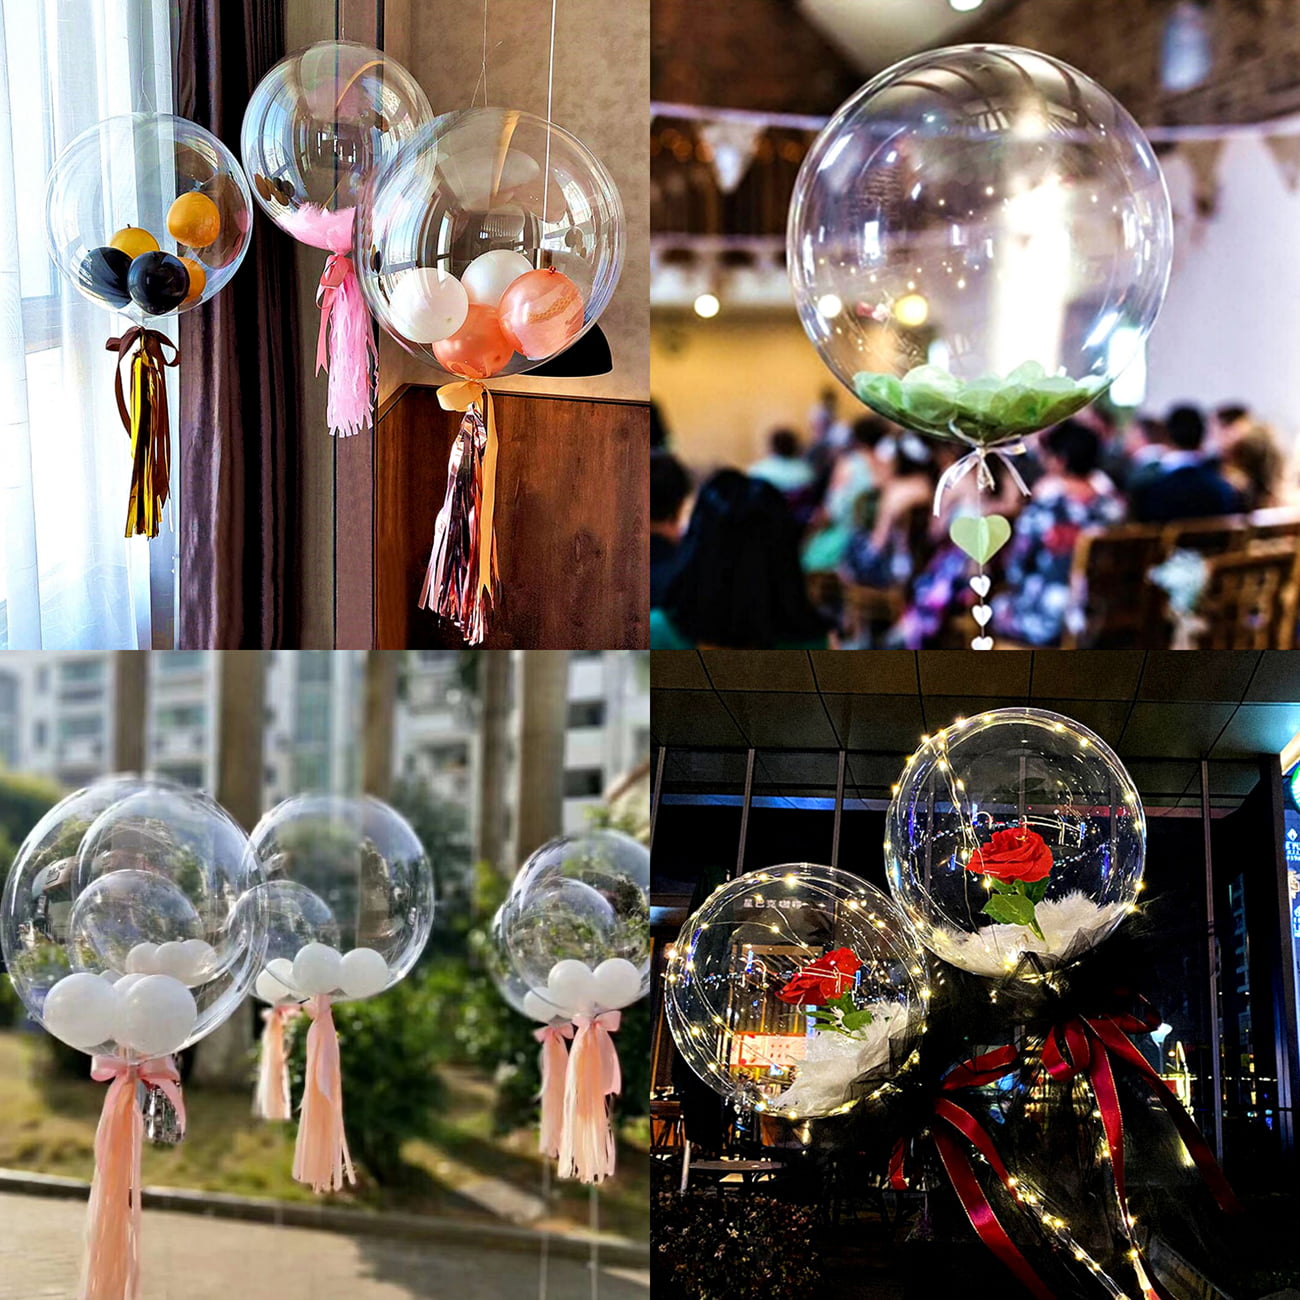 Large Clear Balloons for Stuffing, 12PCS 26 Inch Fillable Big Bubble  Balloons $21. Free for USA. Interested DM me for Details : r/ReviewRequests